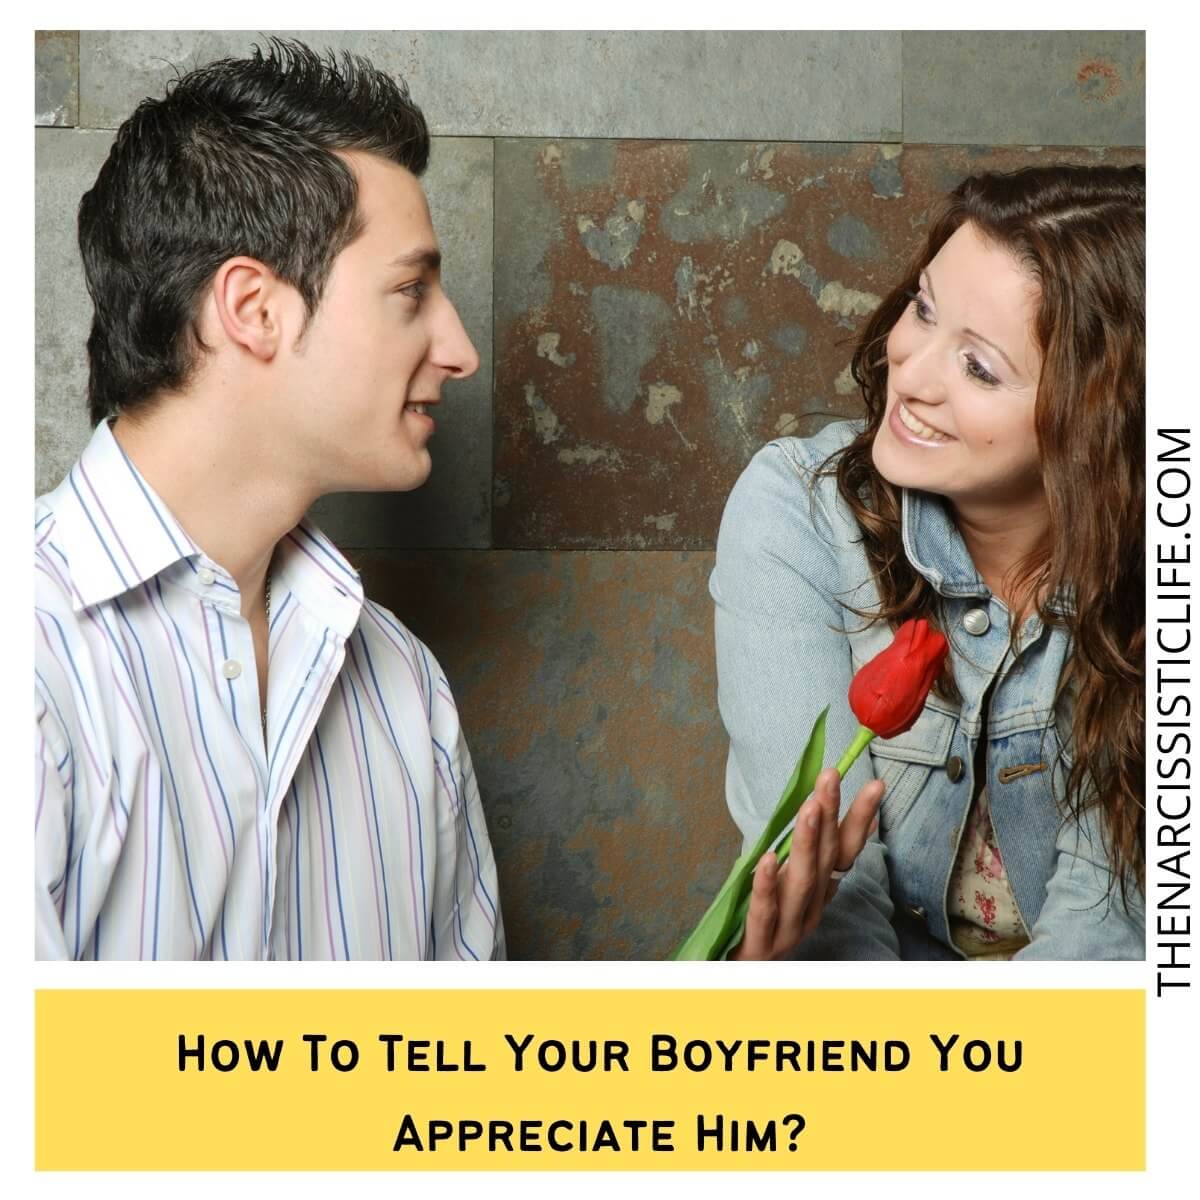 How To Tell Your Boyfriend You Love Him? - The Narcissistic Life